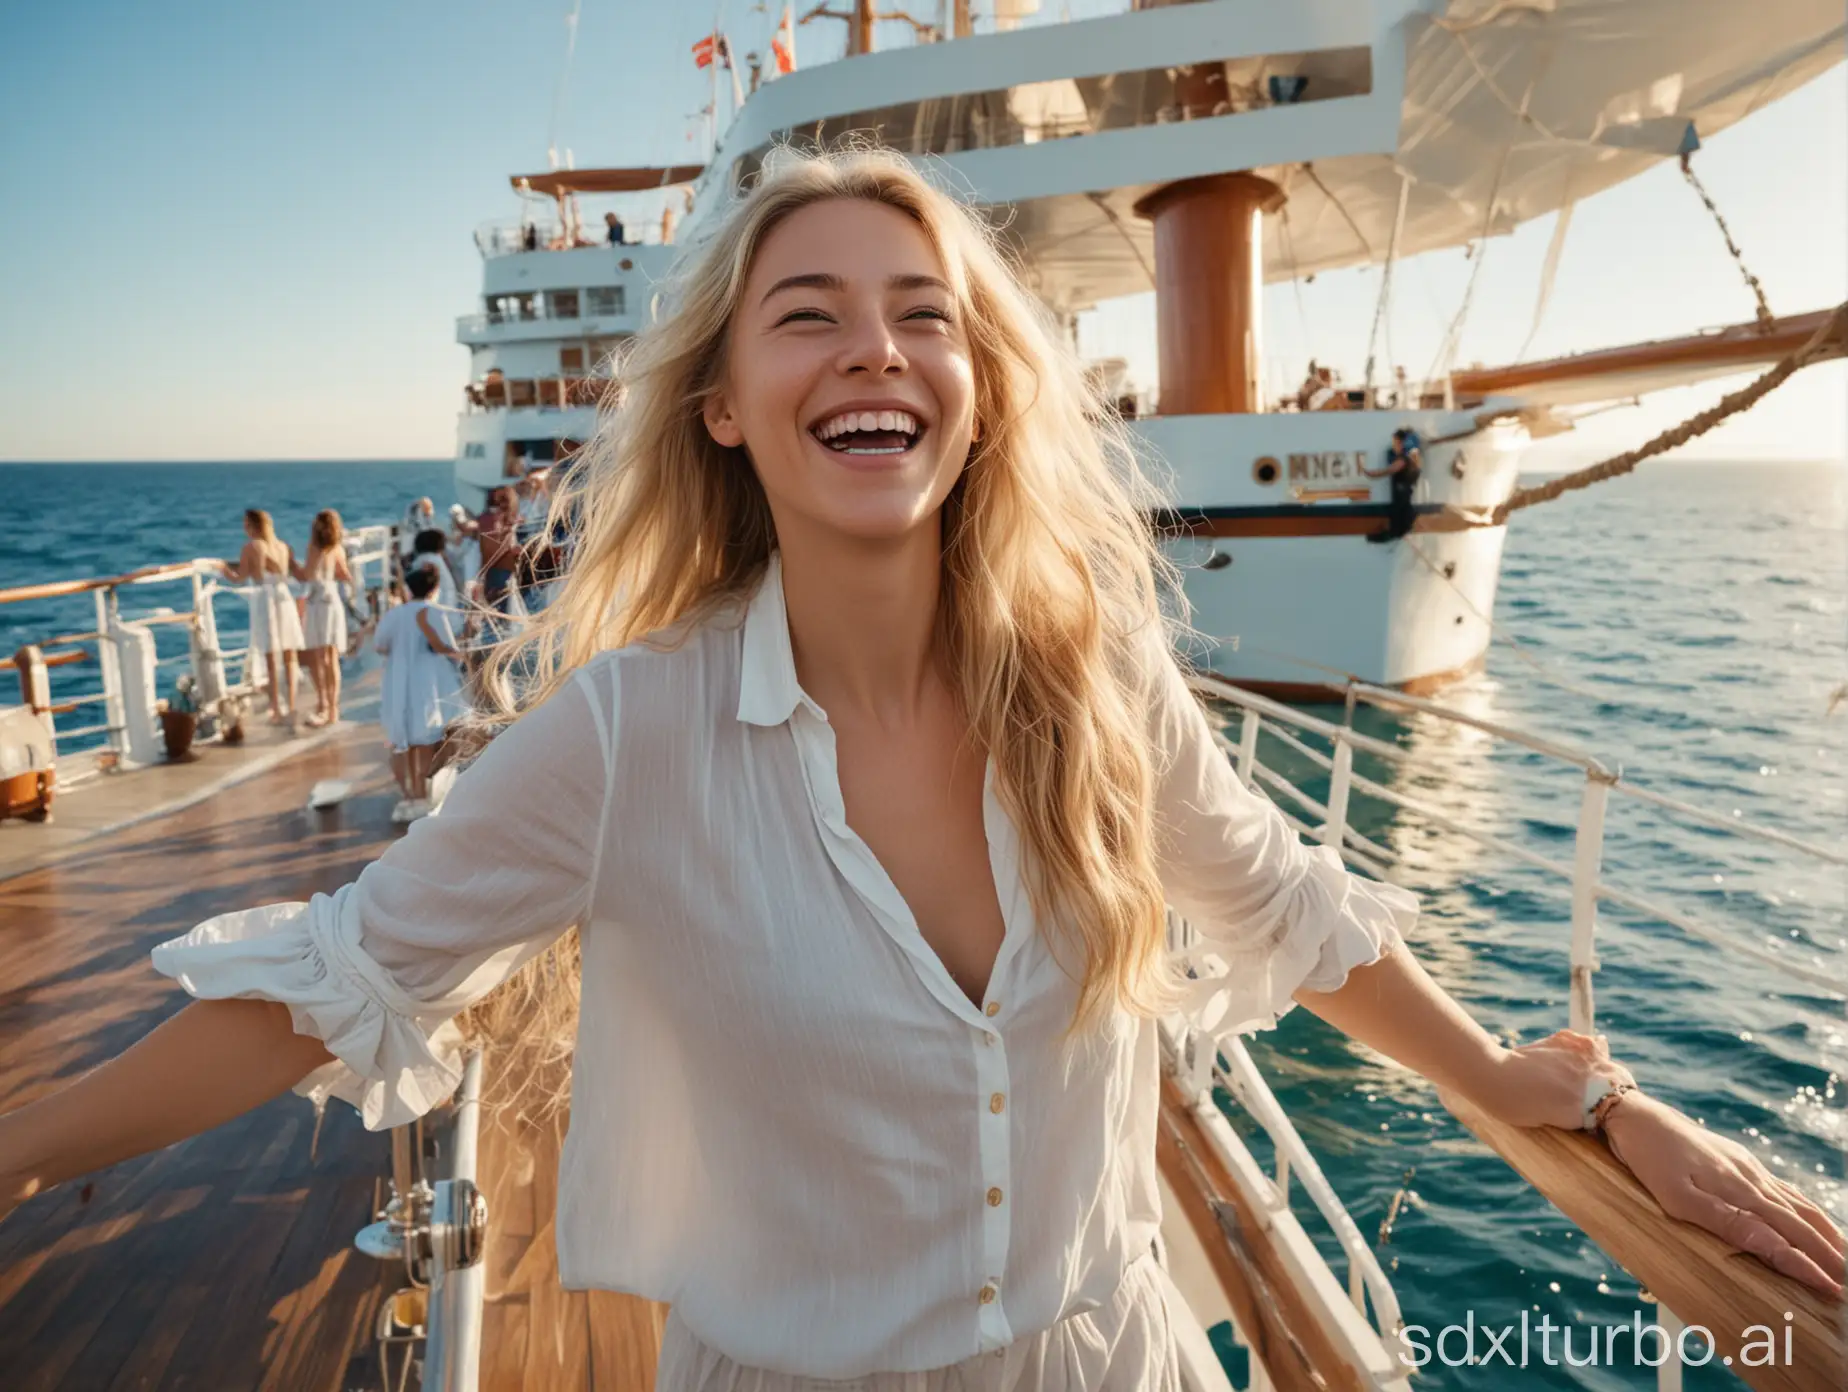 Sunny-Day-on-a-Magnificent-Ship-Woman-with-Long-Blonde-Hair-Laughing-on-Deck